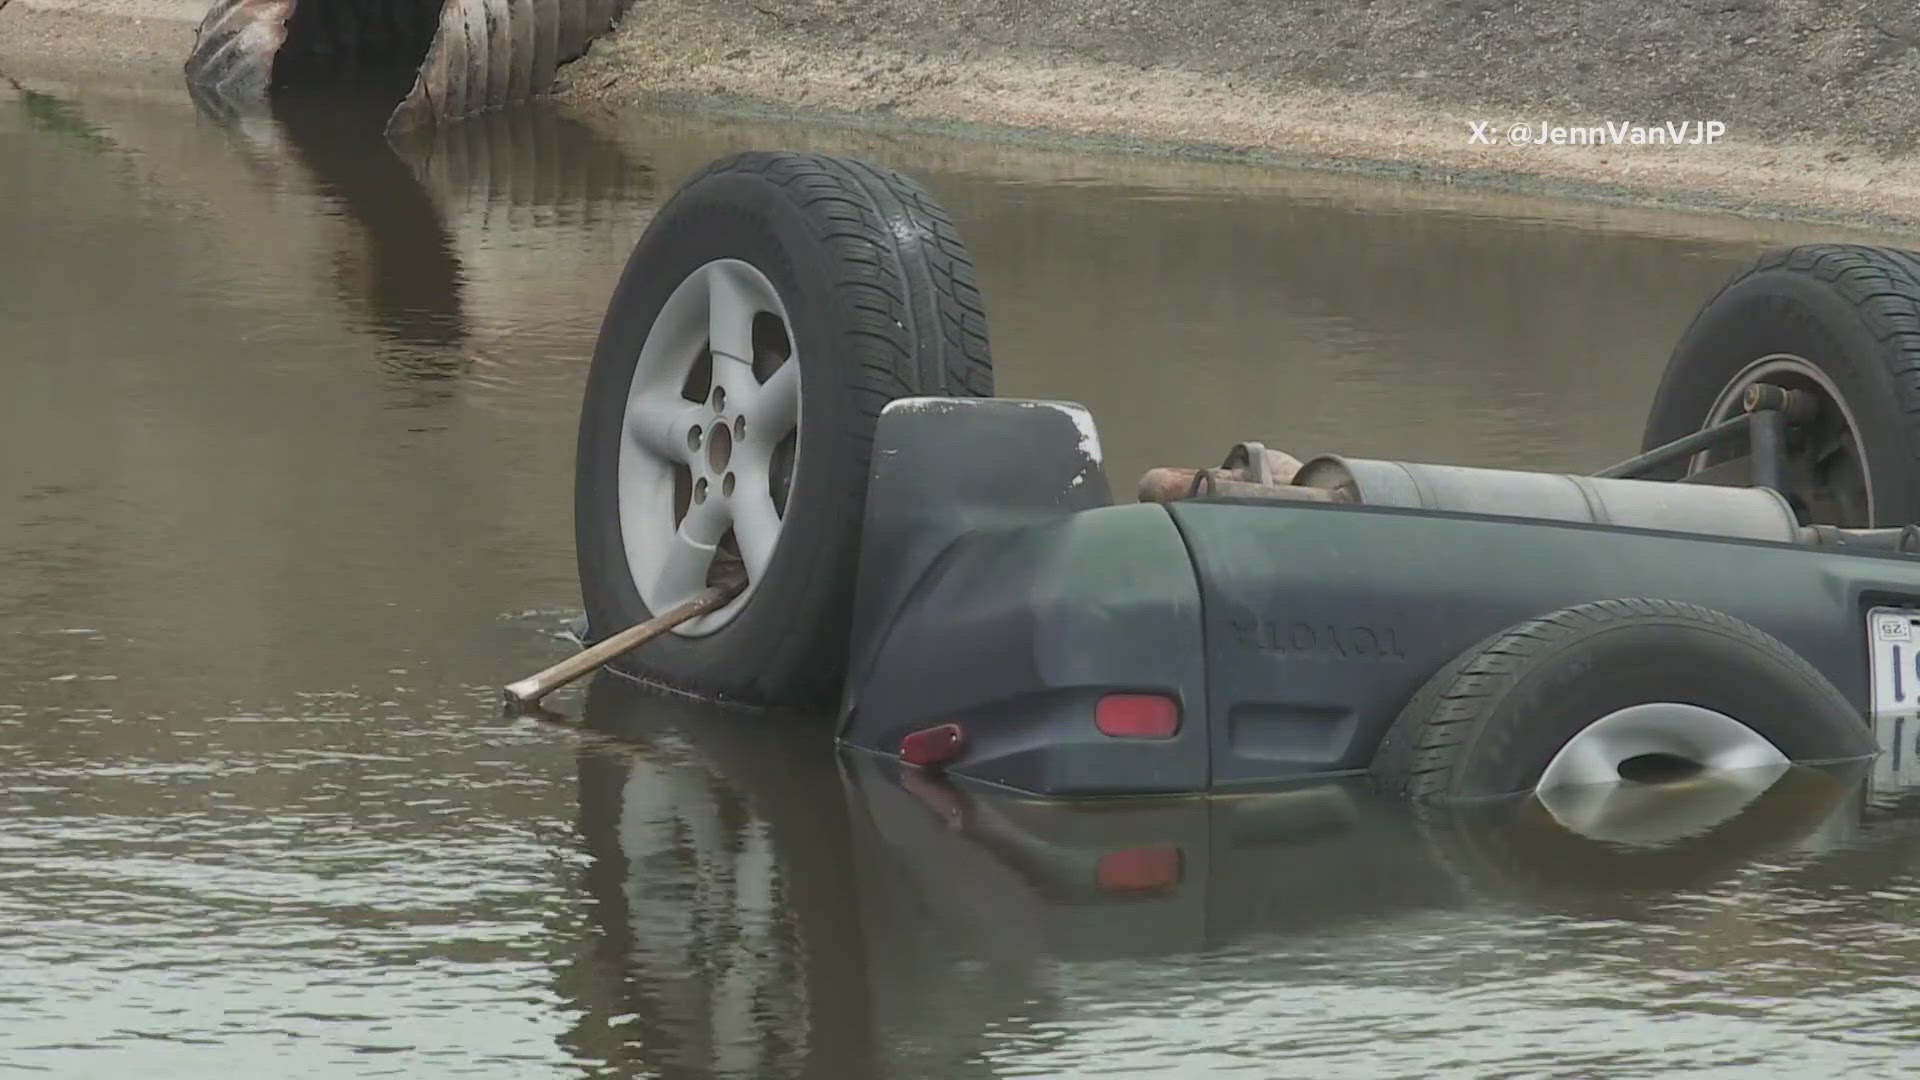 The Jefferson Parish Sheriff's Office says it was a two-vehicle crash, and one vehicle went into the canal.